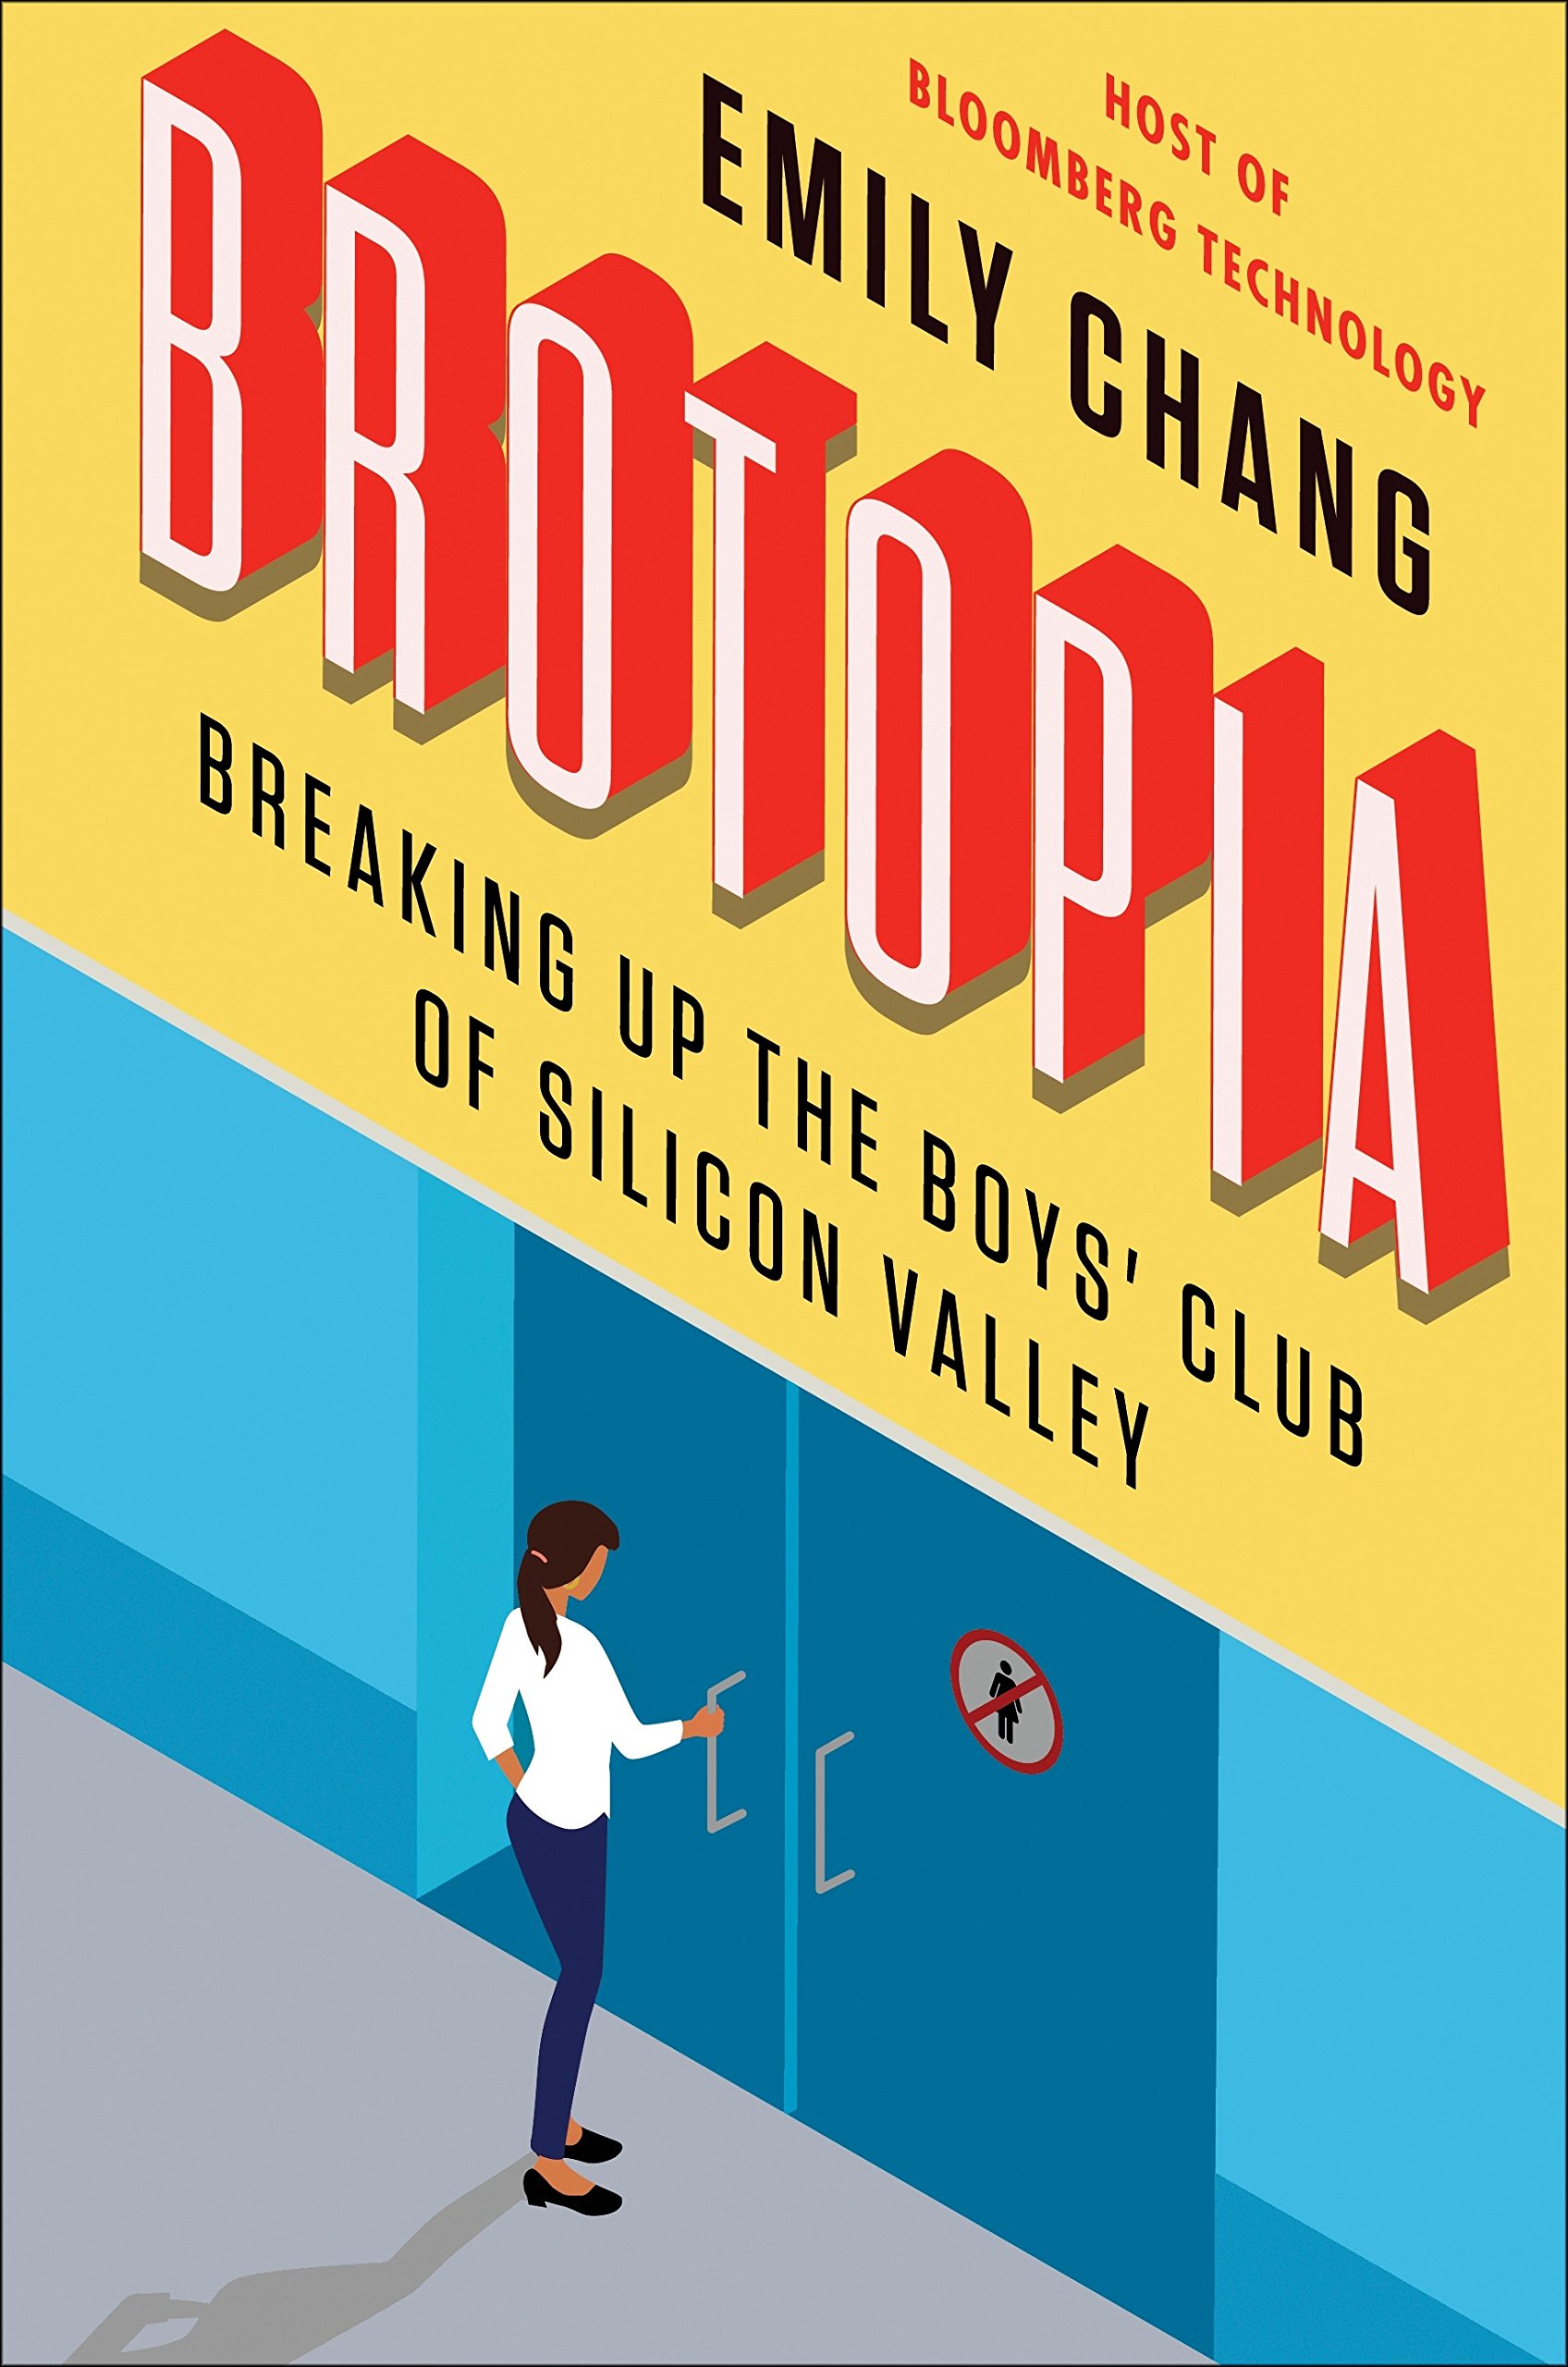 "Brotopia" cover – Breaking up the boys club of silicon valley